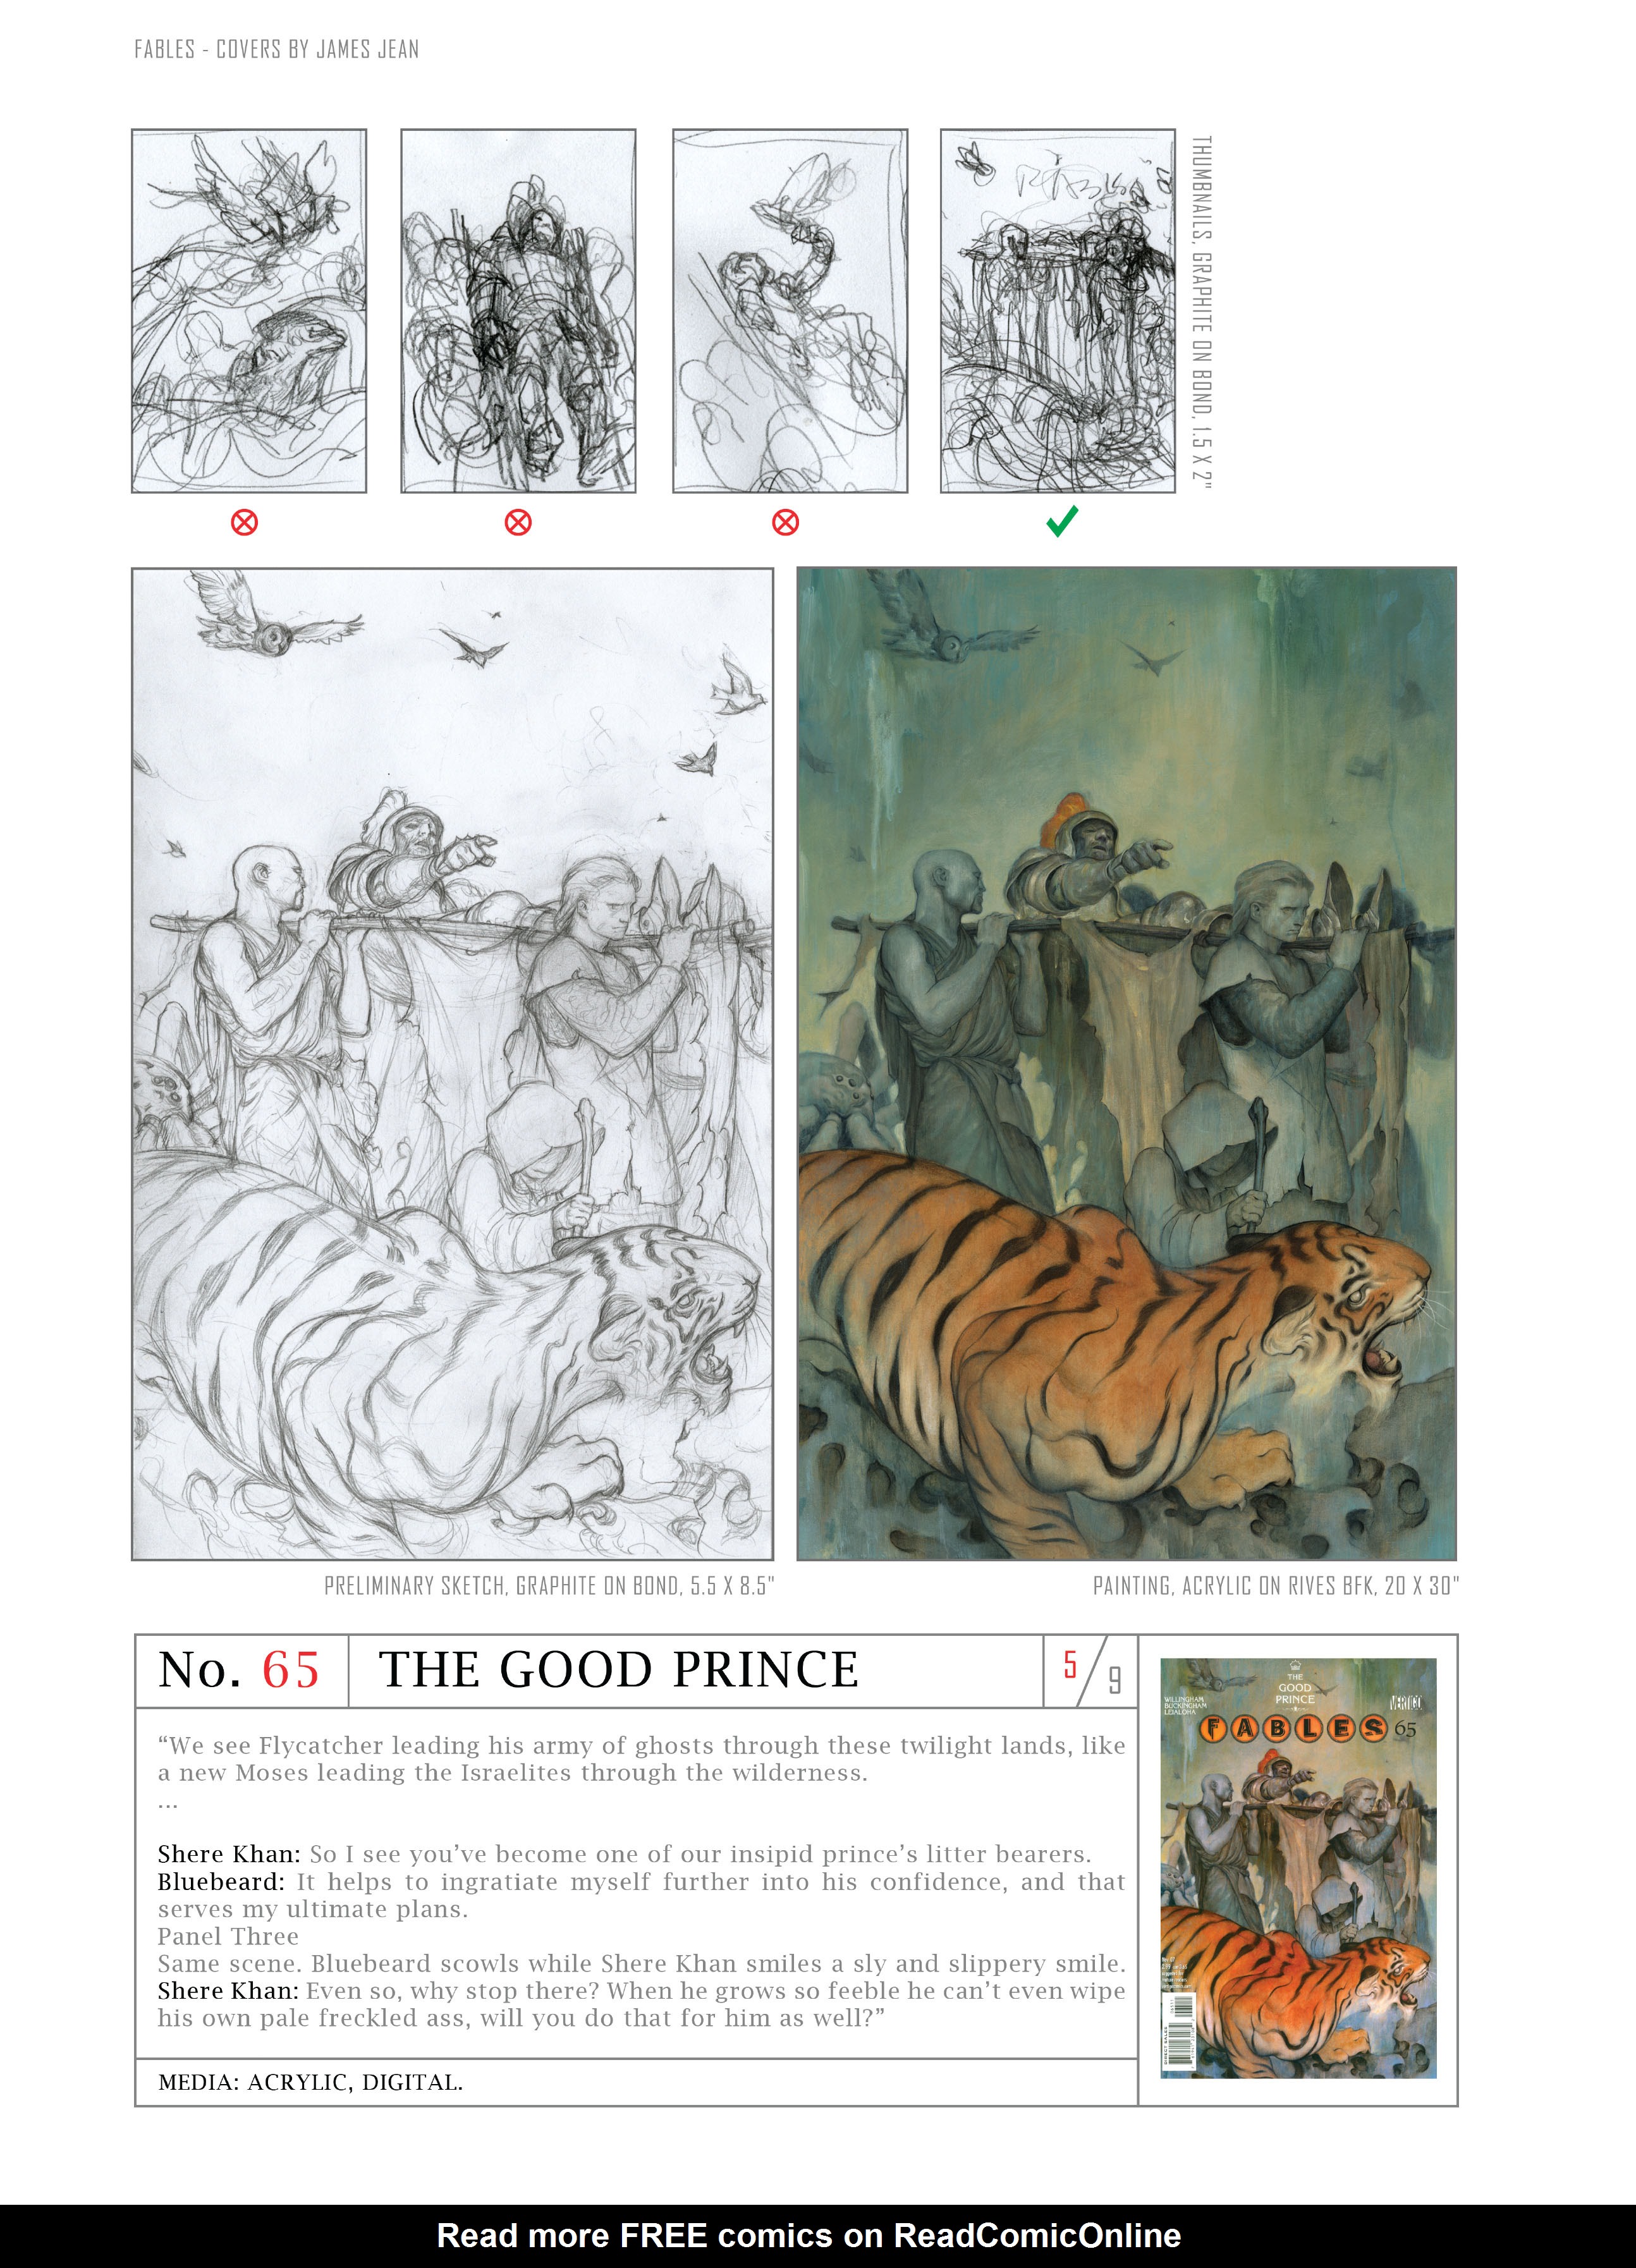 Read online Fables: Covers by James Jean comic -  Issue # TPB (Part 2) - 63